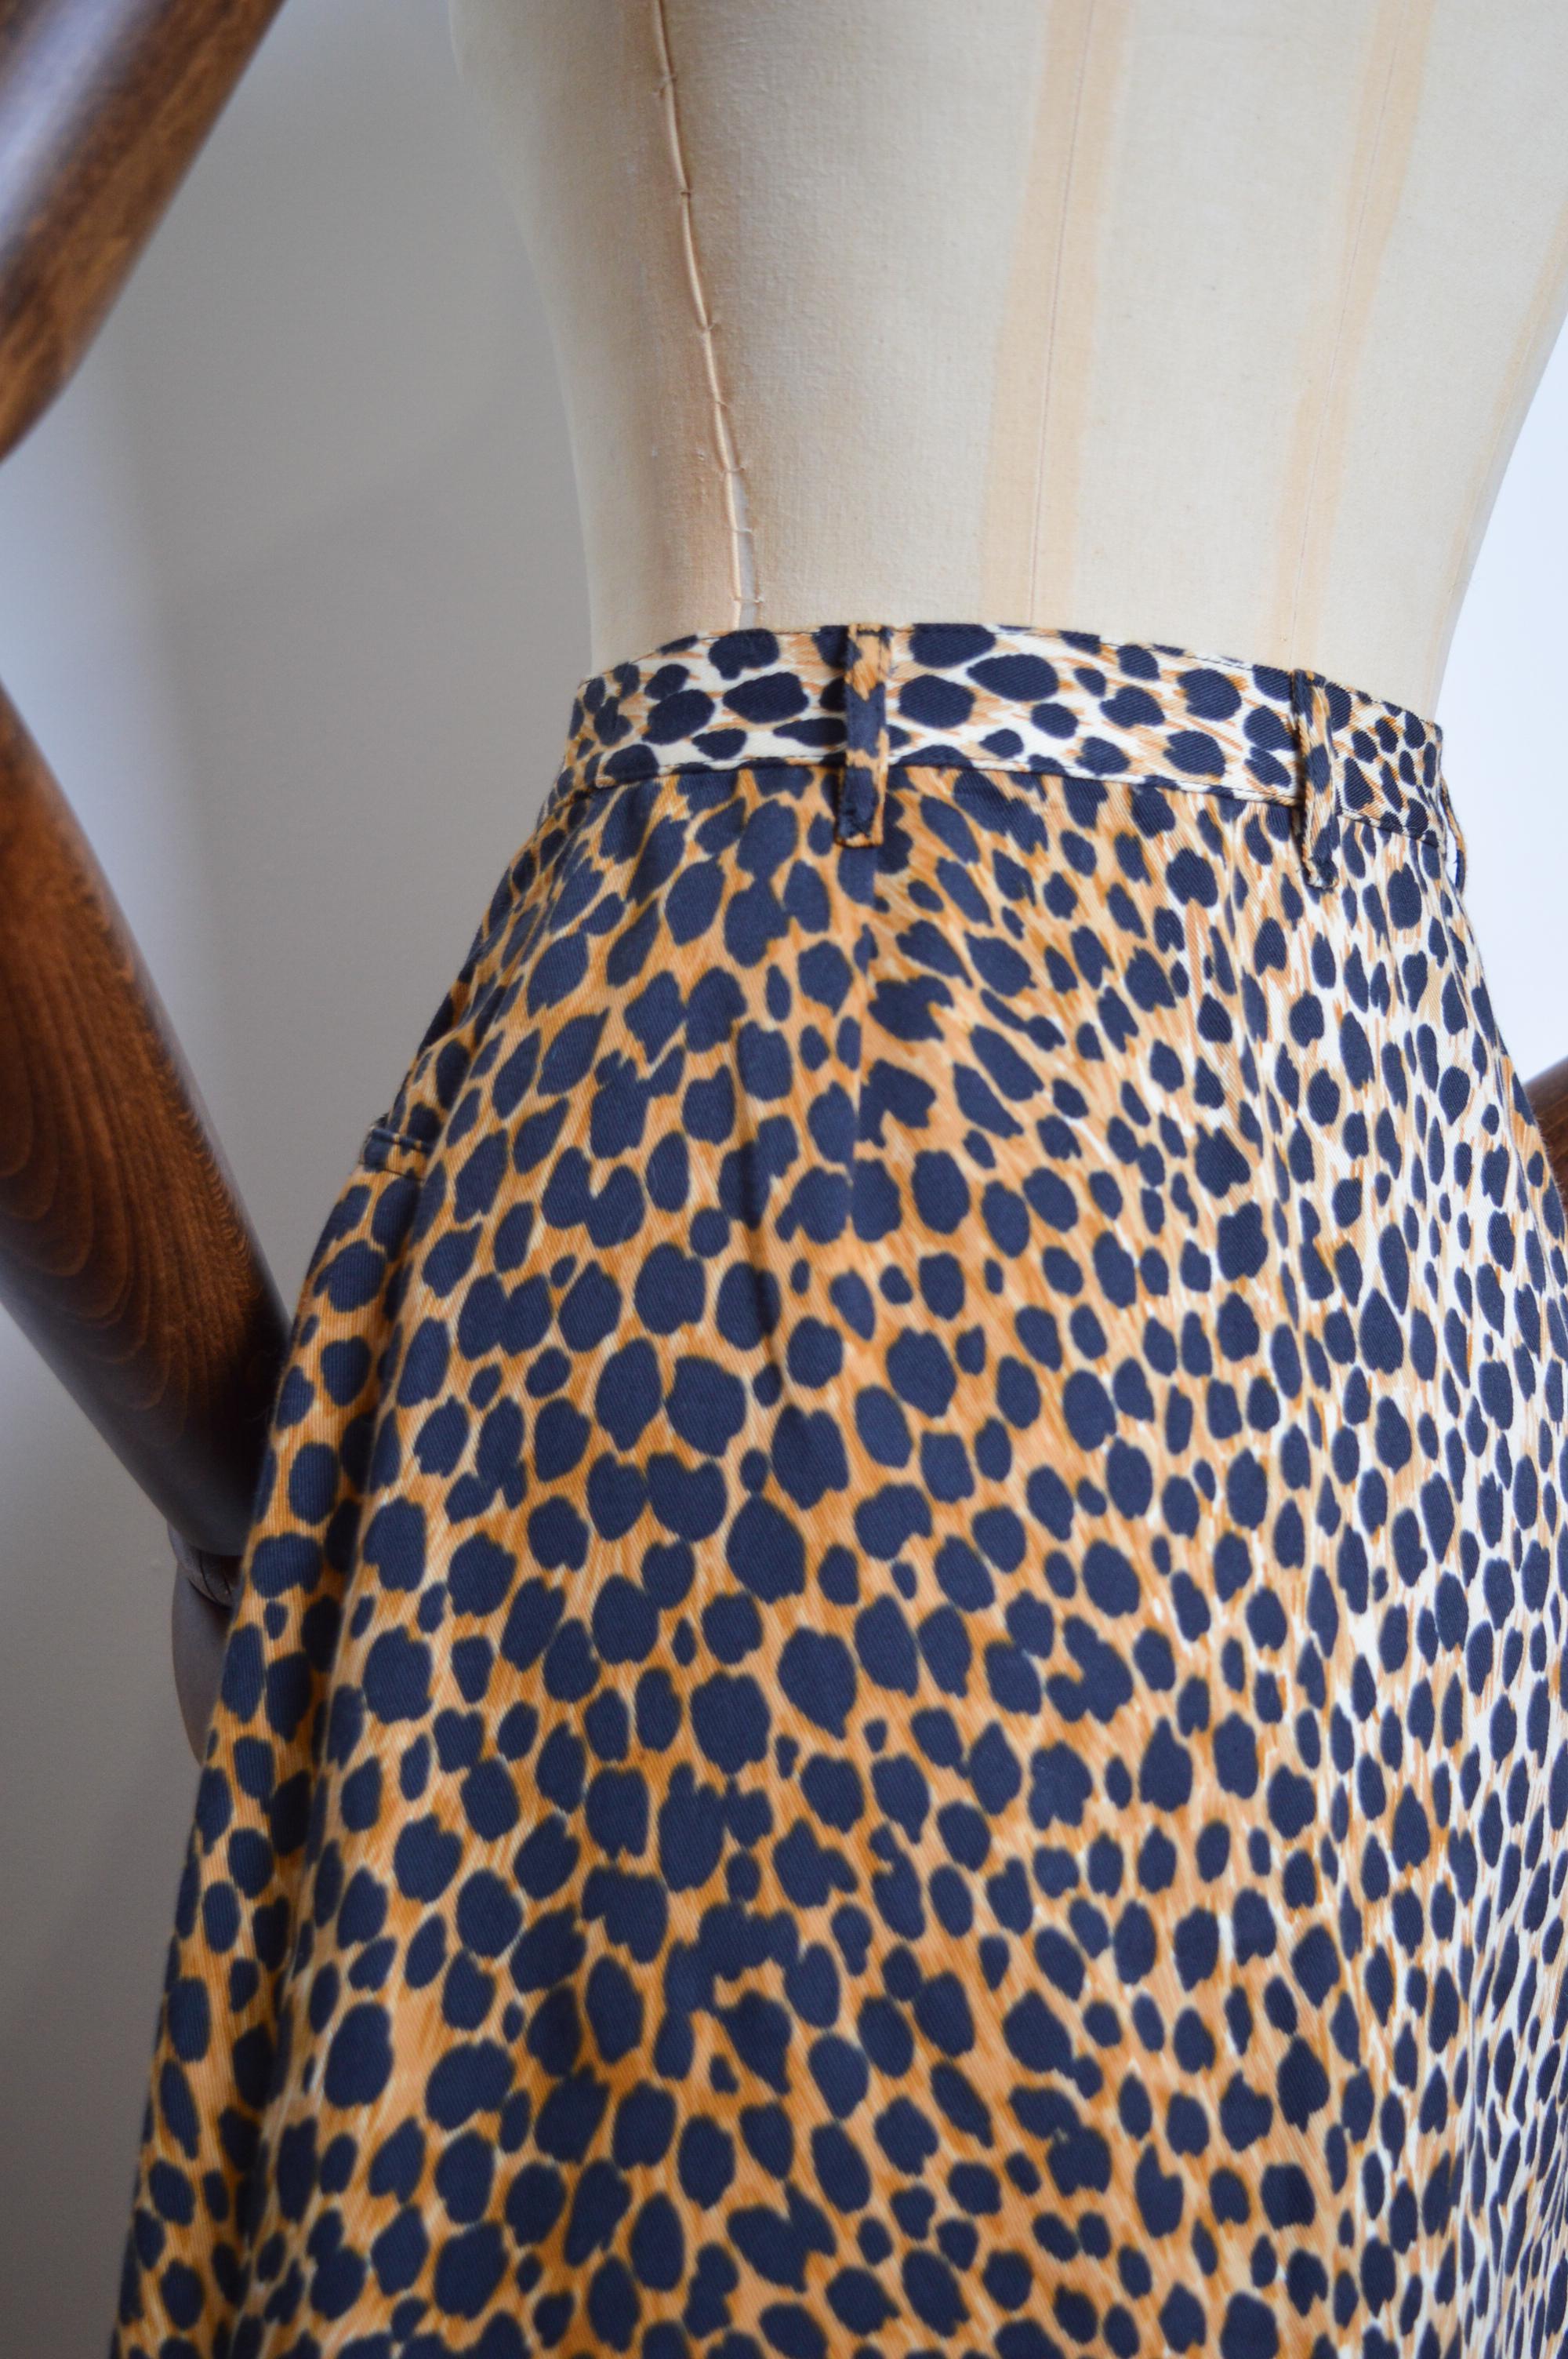 Spring 1996 Dolce & Gabbana High Waisted Cheetah Animal Print Mini Skirt In Good Condition For Sale In Sheffield, GB